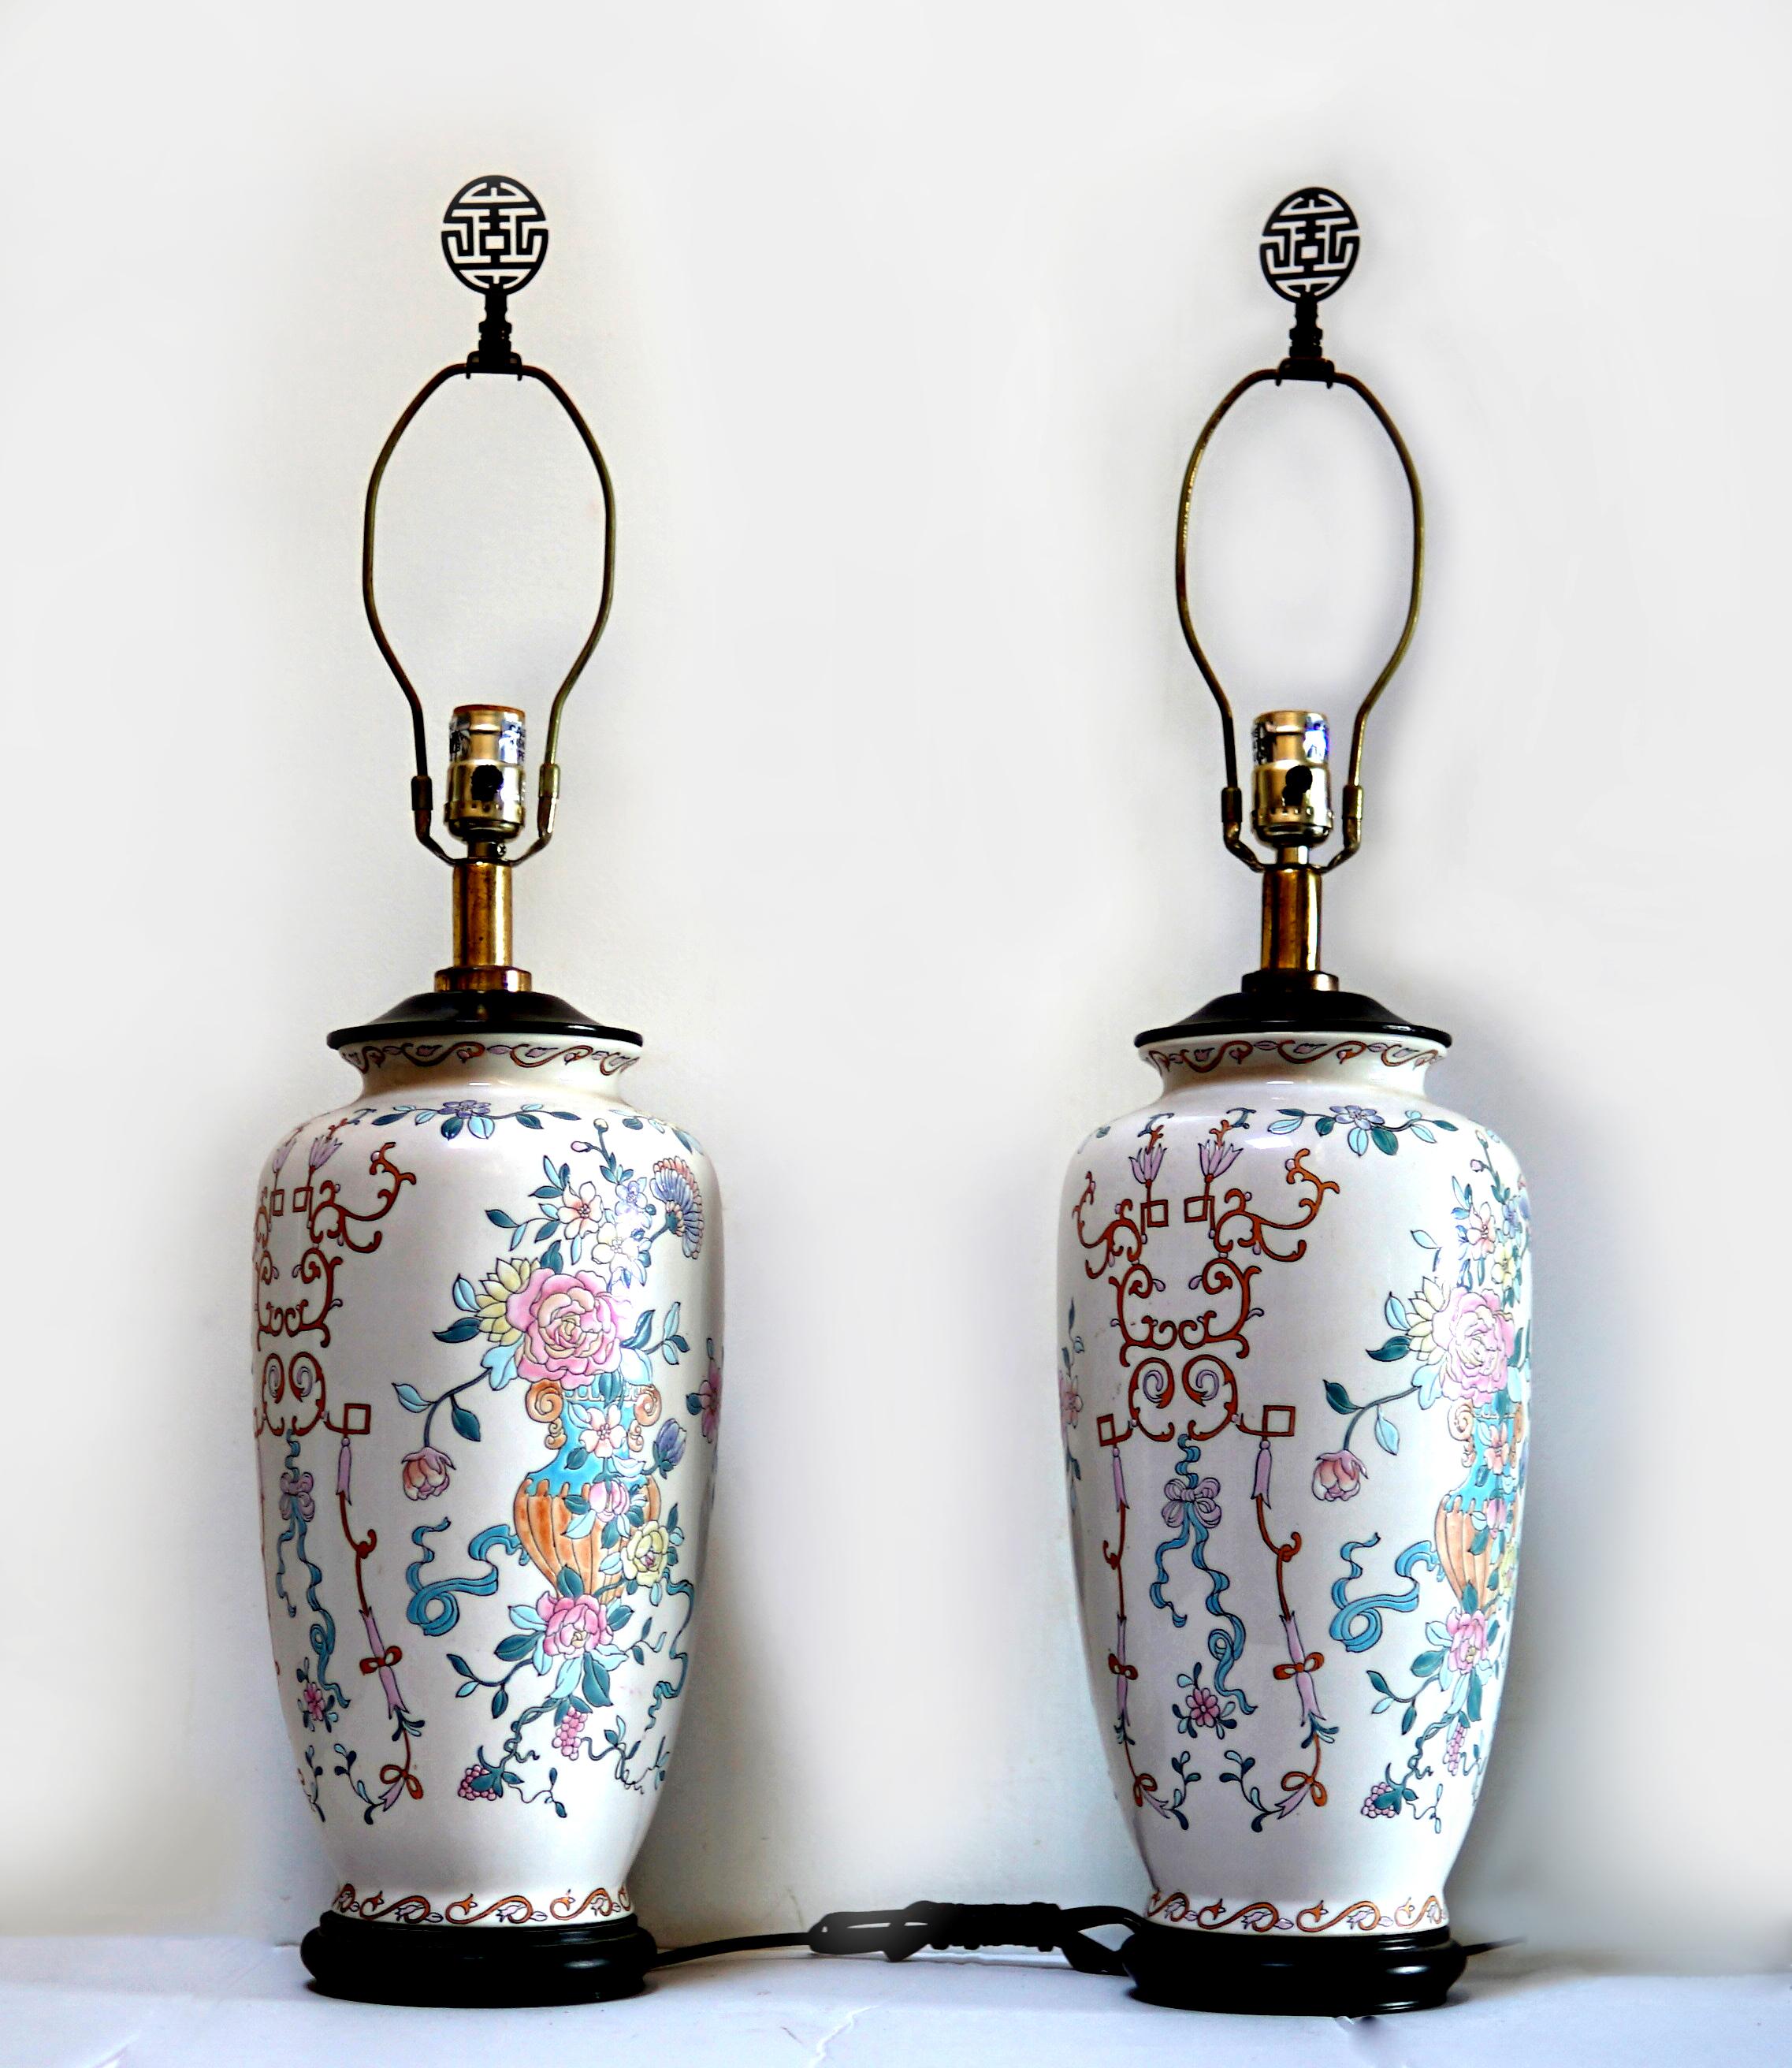 A soft color palette on a blush-colored ground Famille Rose table lamp creates statement lighting. The overall pattern, porcelain quality and the colors of the pair are entirely Hand Painted in a Famille Rose Pattern.  This pair of Chinese Porcelain